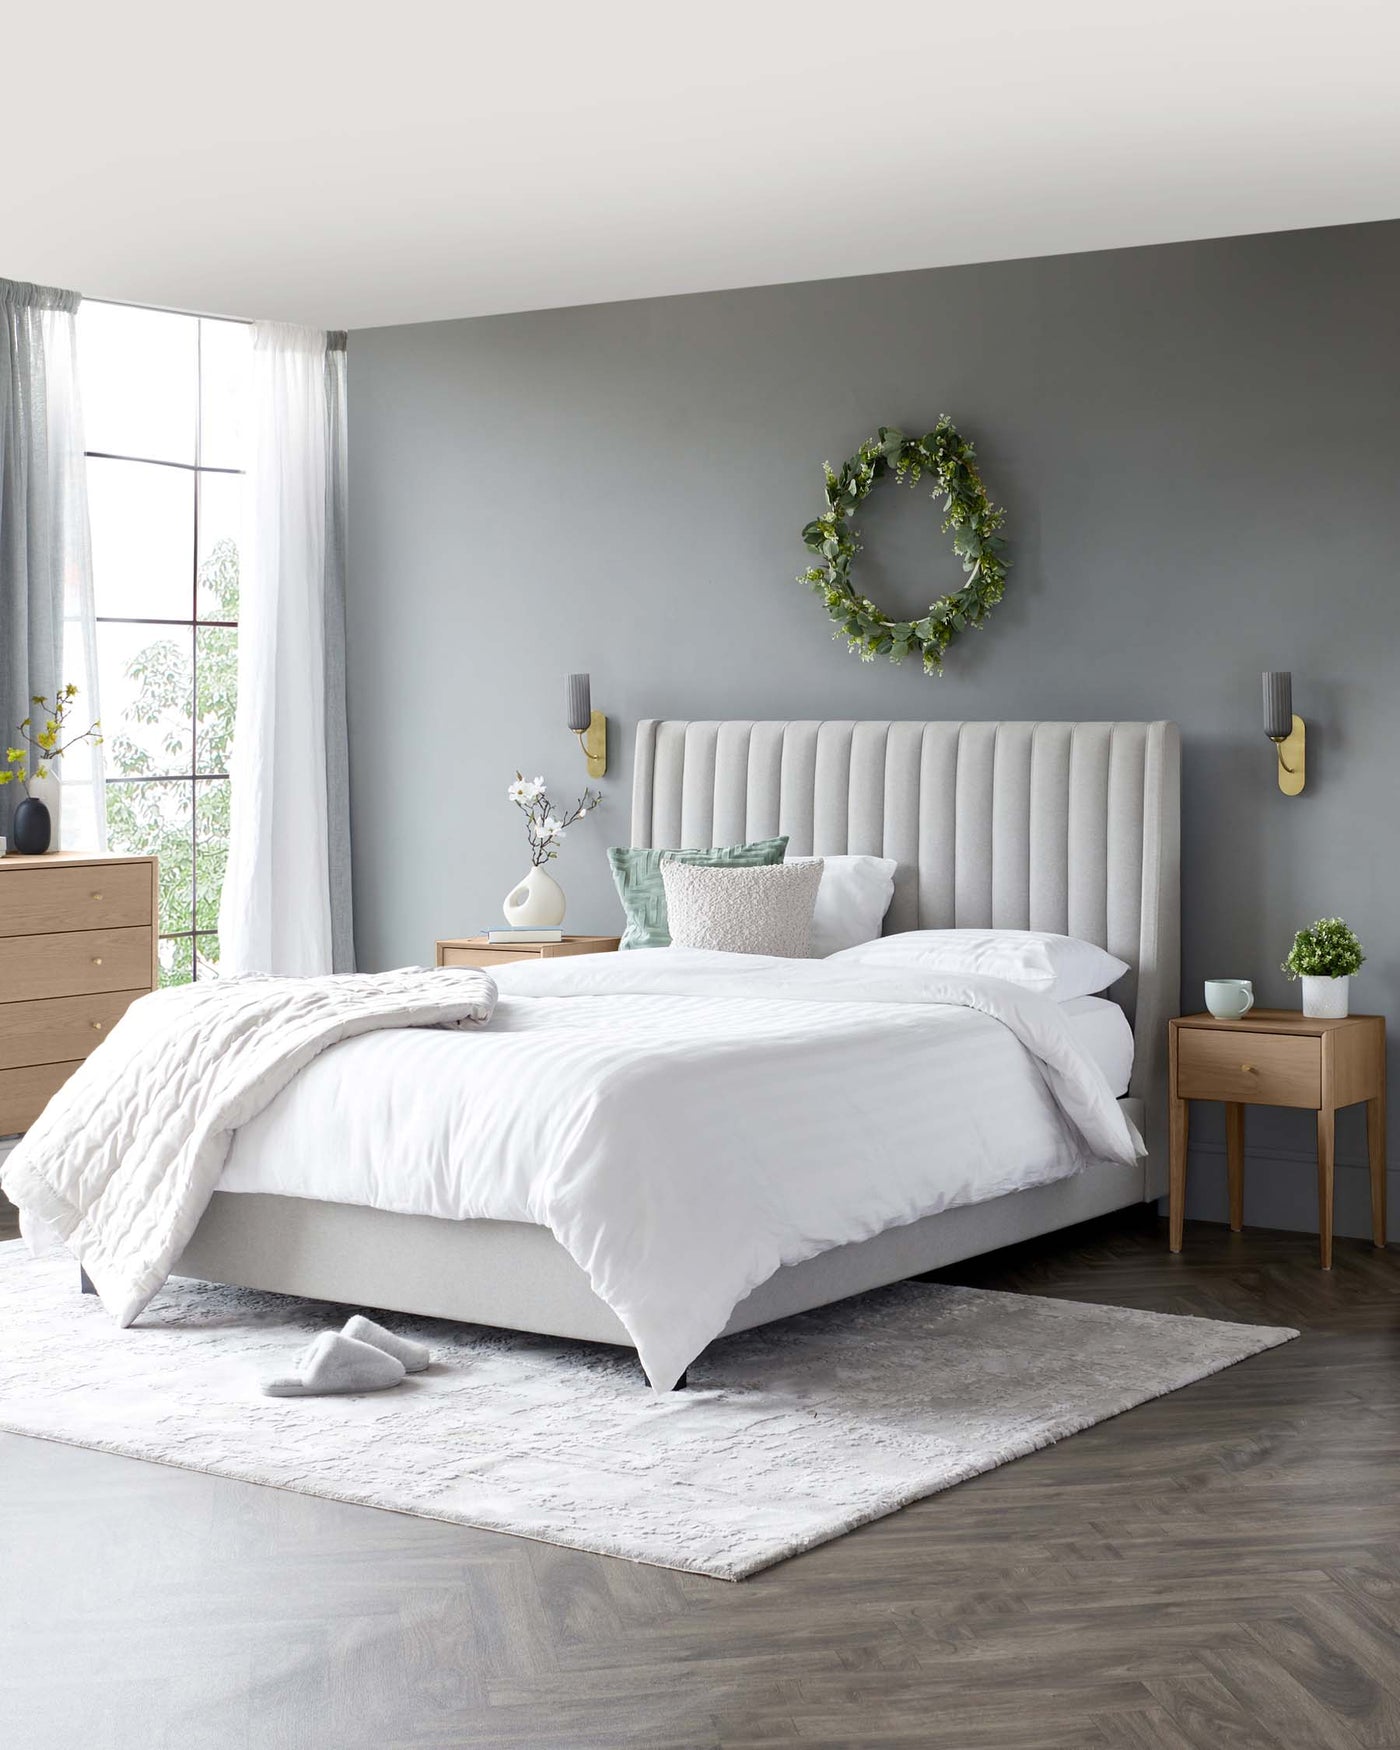 A modern bedroom featuring a large upholstered bed with a tall, tufted headboard. Beside the bed is a pair of mid-century-inspired nightstands with tapered legs. Opposite the bed stands a minimalistic, multi-drawer wooden dresser with simple knobs. The room is completed with a soft, textured area rug beneath the bed.